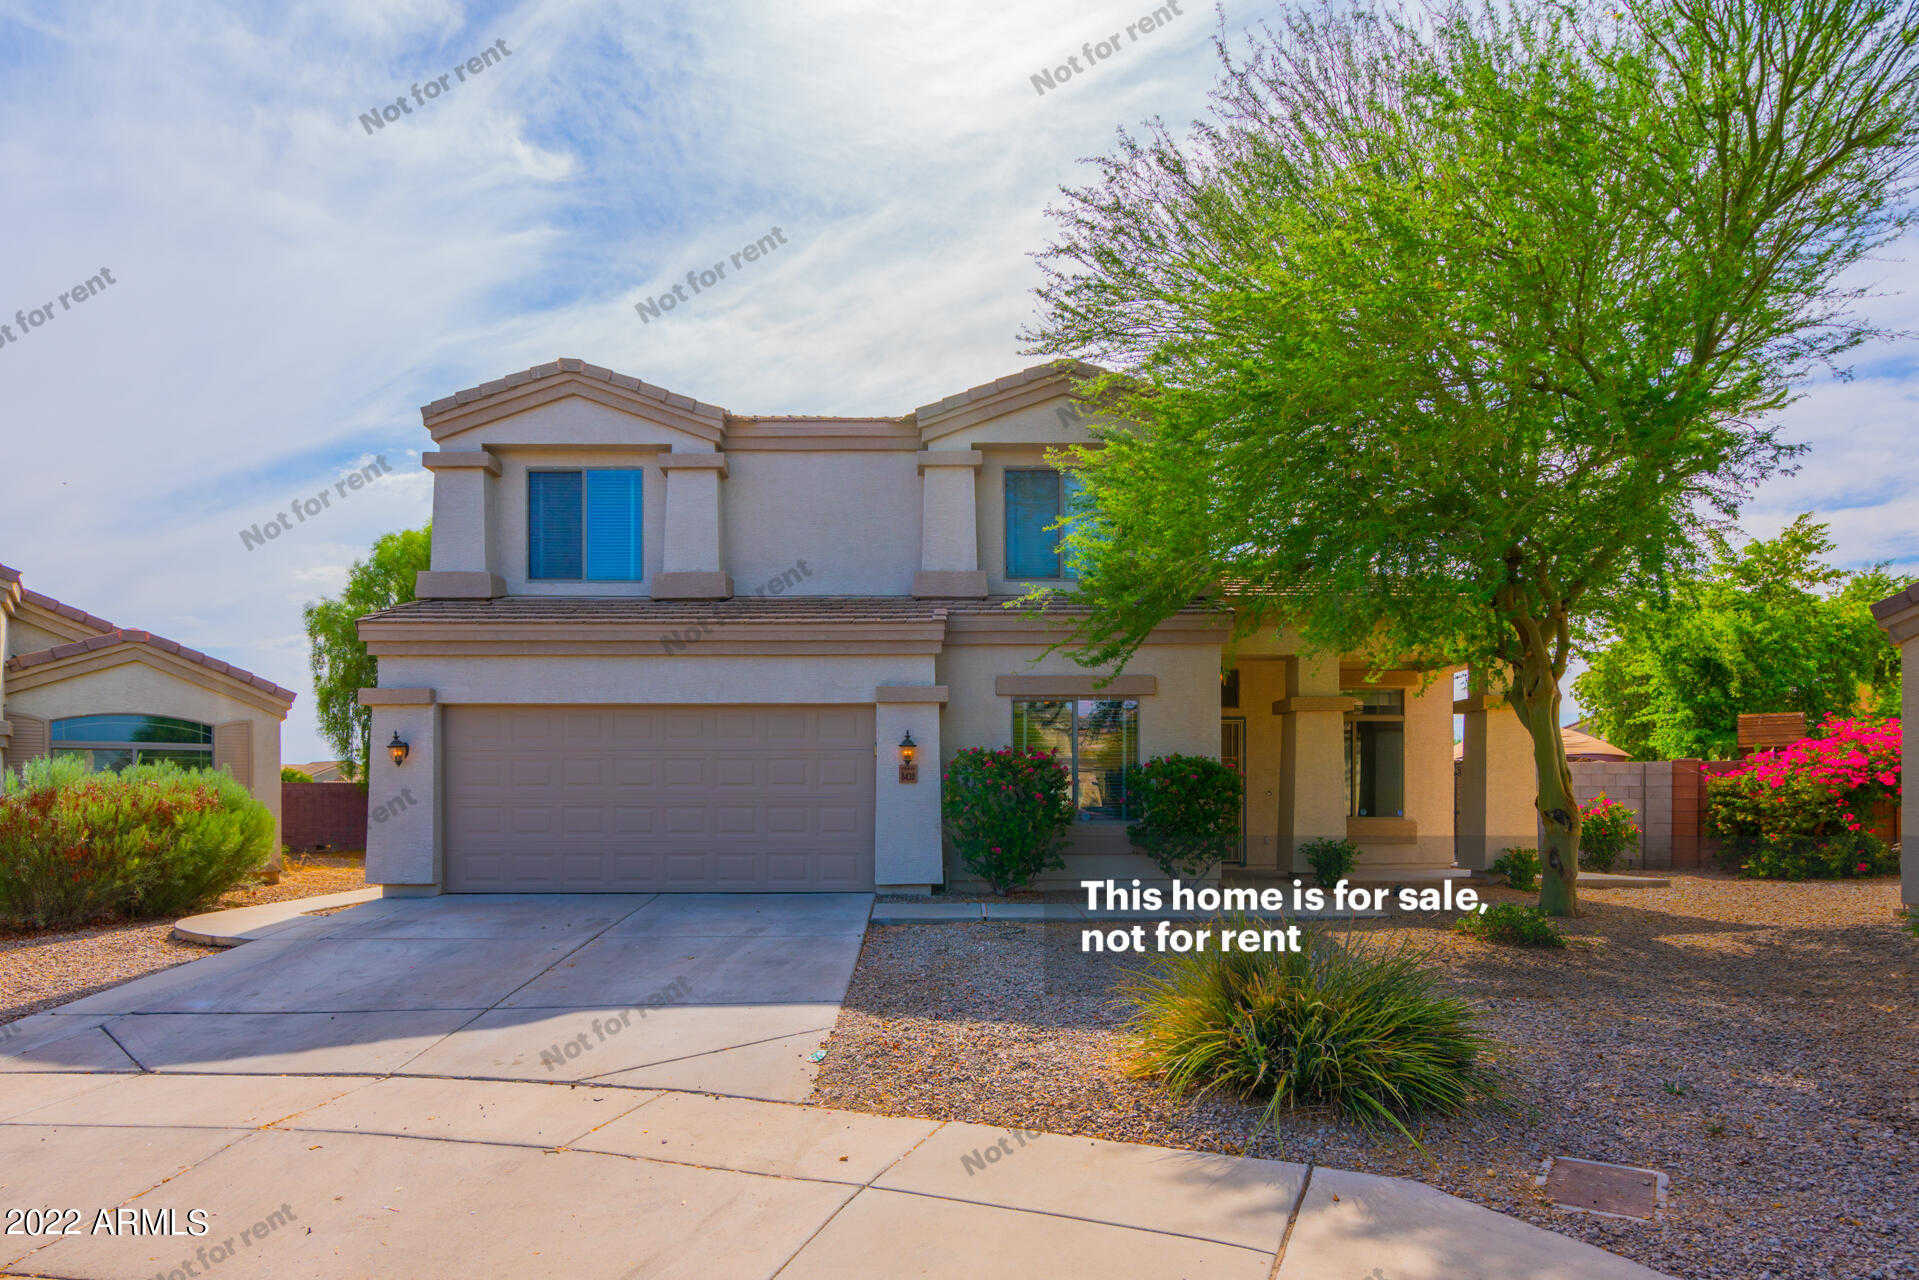 $544,000 - 5Br/3Ba - Home for Sale in 83rd Ave & Lower Buckeye Rd, Tolleson